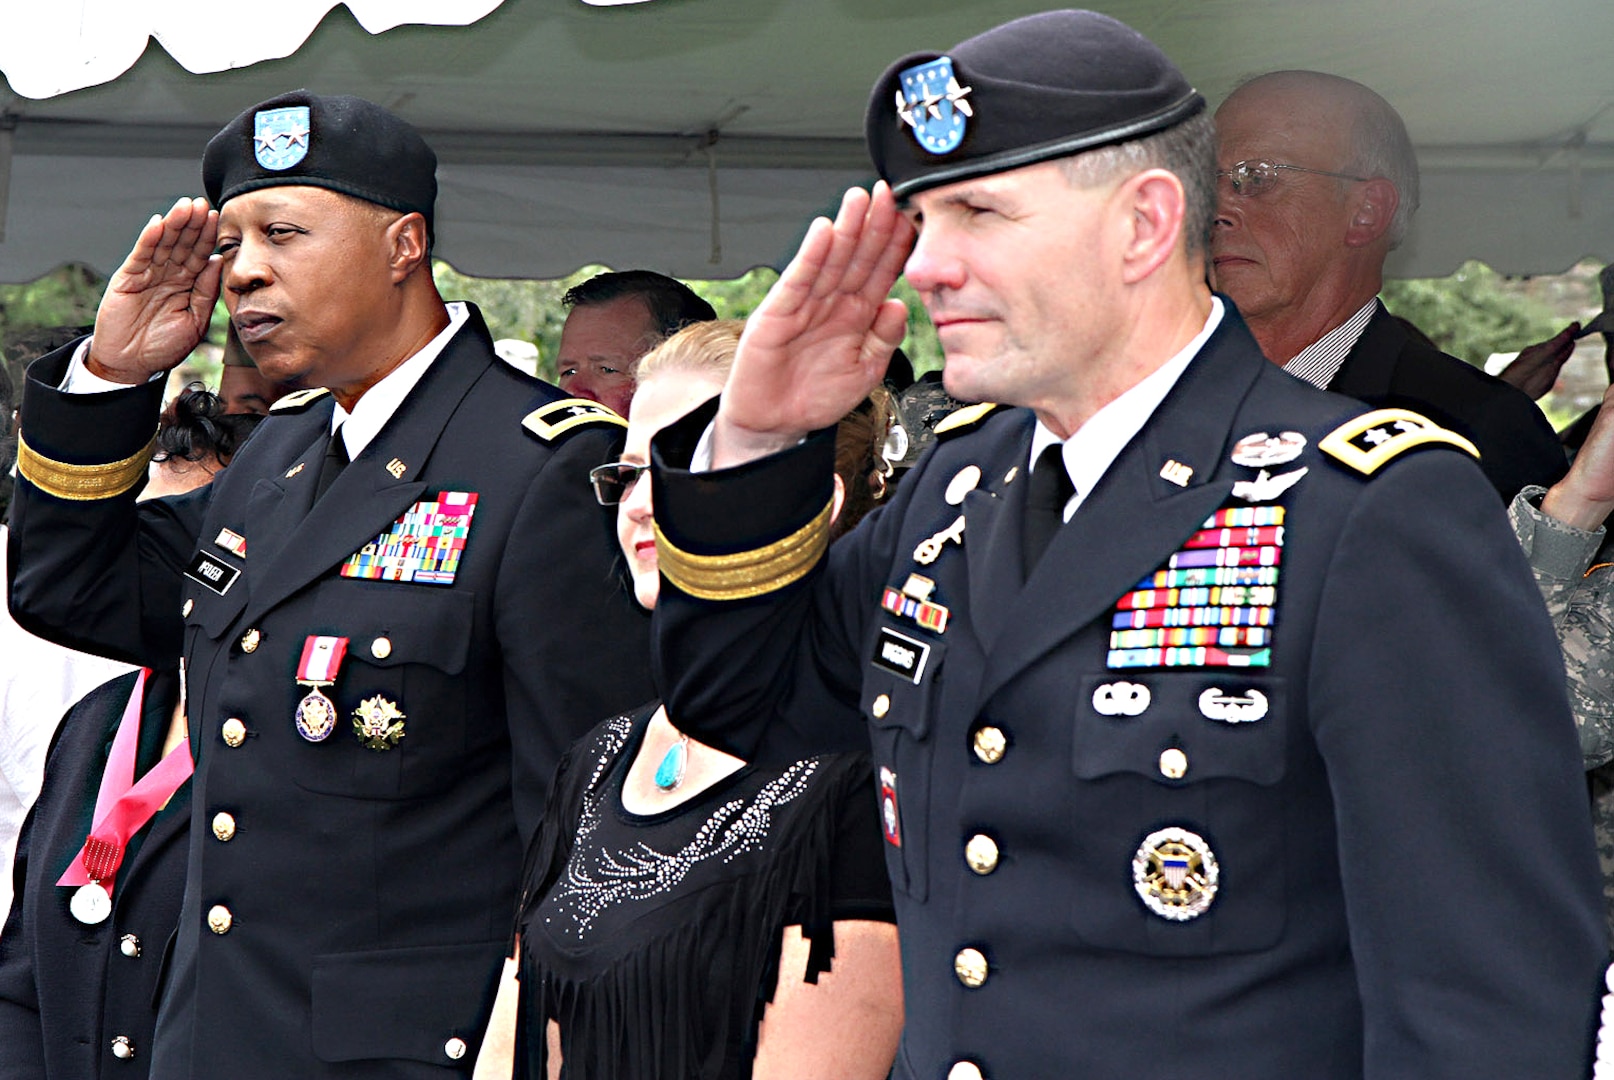 Maj. Gen. Adolph McQueen Jr. (left), deputy commanding general for support, U.S. Army North (Fifth Army), salutes the colors of the nation for the last time alongside Lt. Gen. Perry Wiggins, commanding general for Army North and senior Army commander for Fort Sam Houston and Camp Bullis, during his retirement ceremony Sept. 17 in the historic Quadrangle. McQueen enlisted in the U.S. Marine Corps in 1971 and was directly commissioned into the Michigan National Guard in 1982. (Photo by Staff Sgt. Corey Baltos, U.S. Army North Public Affairs)